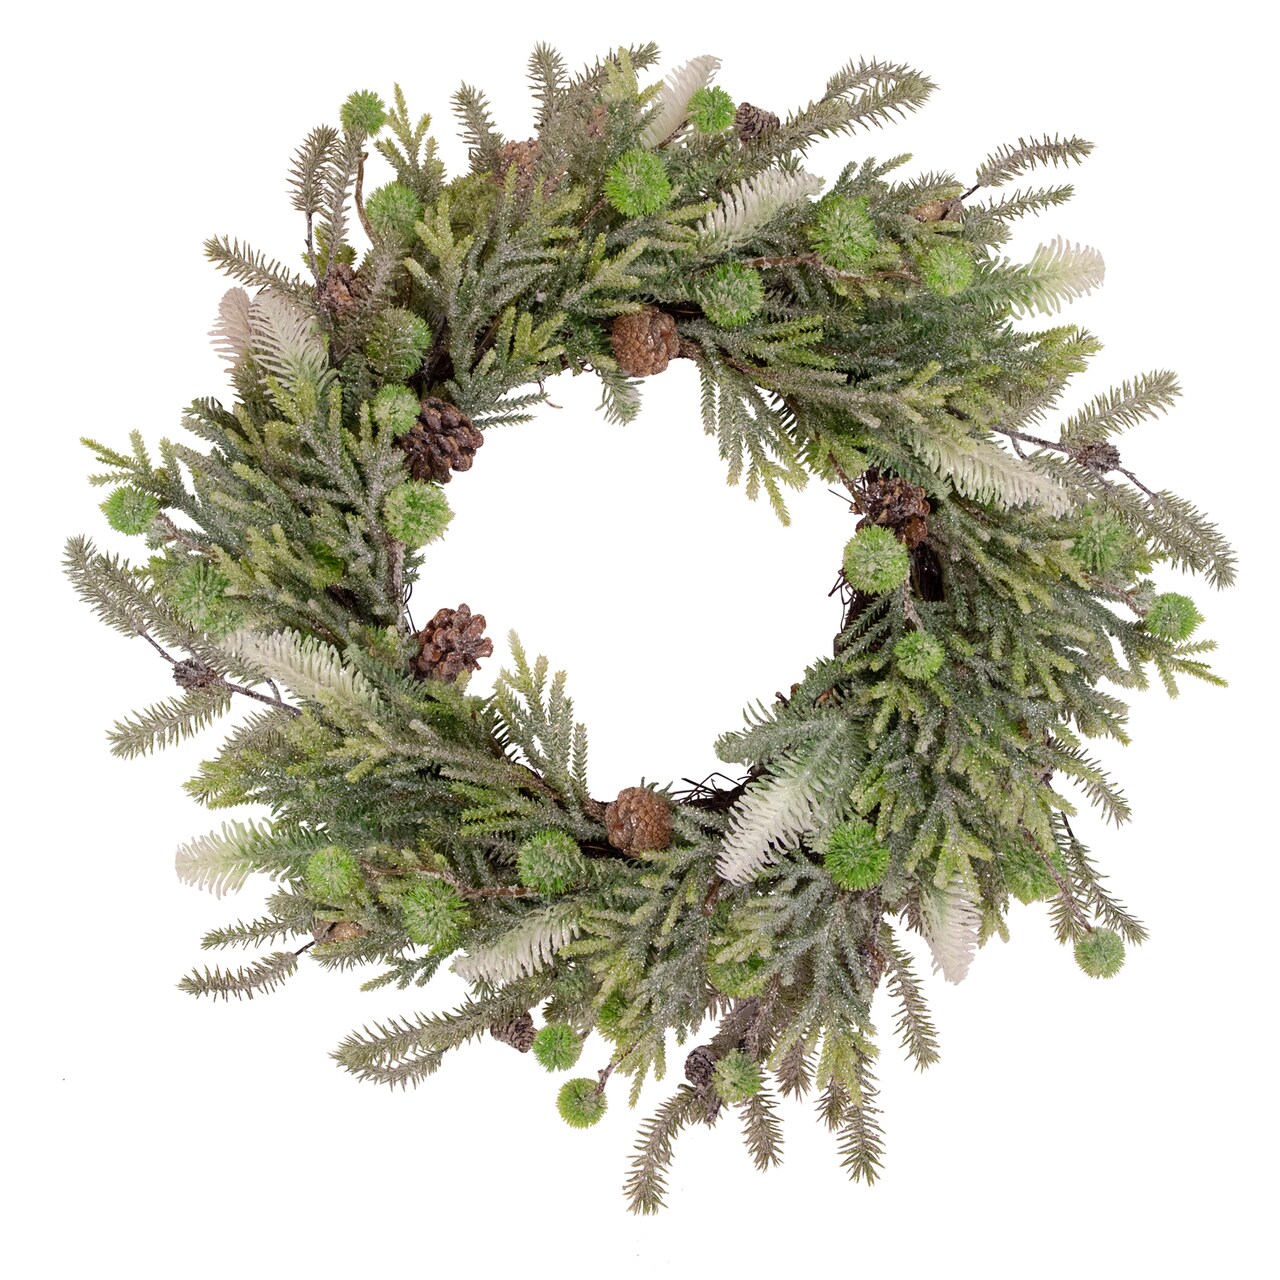 Northlight Artificial Christmas Wreath with Frosted Foliage and Pine Cones, 24-Inch, Unlit